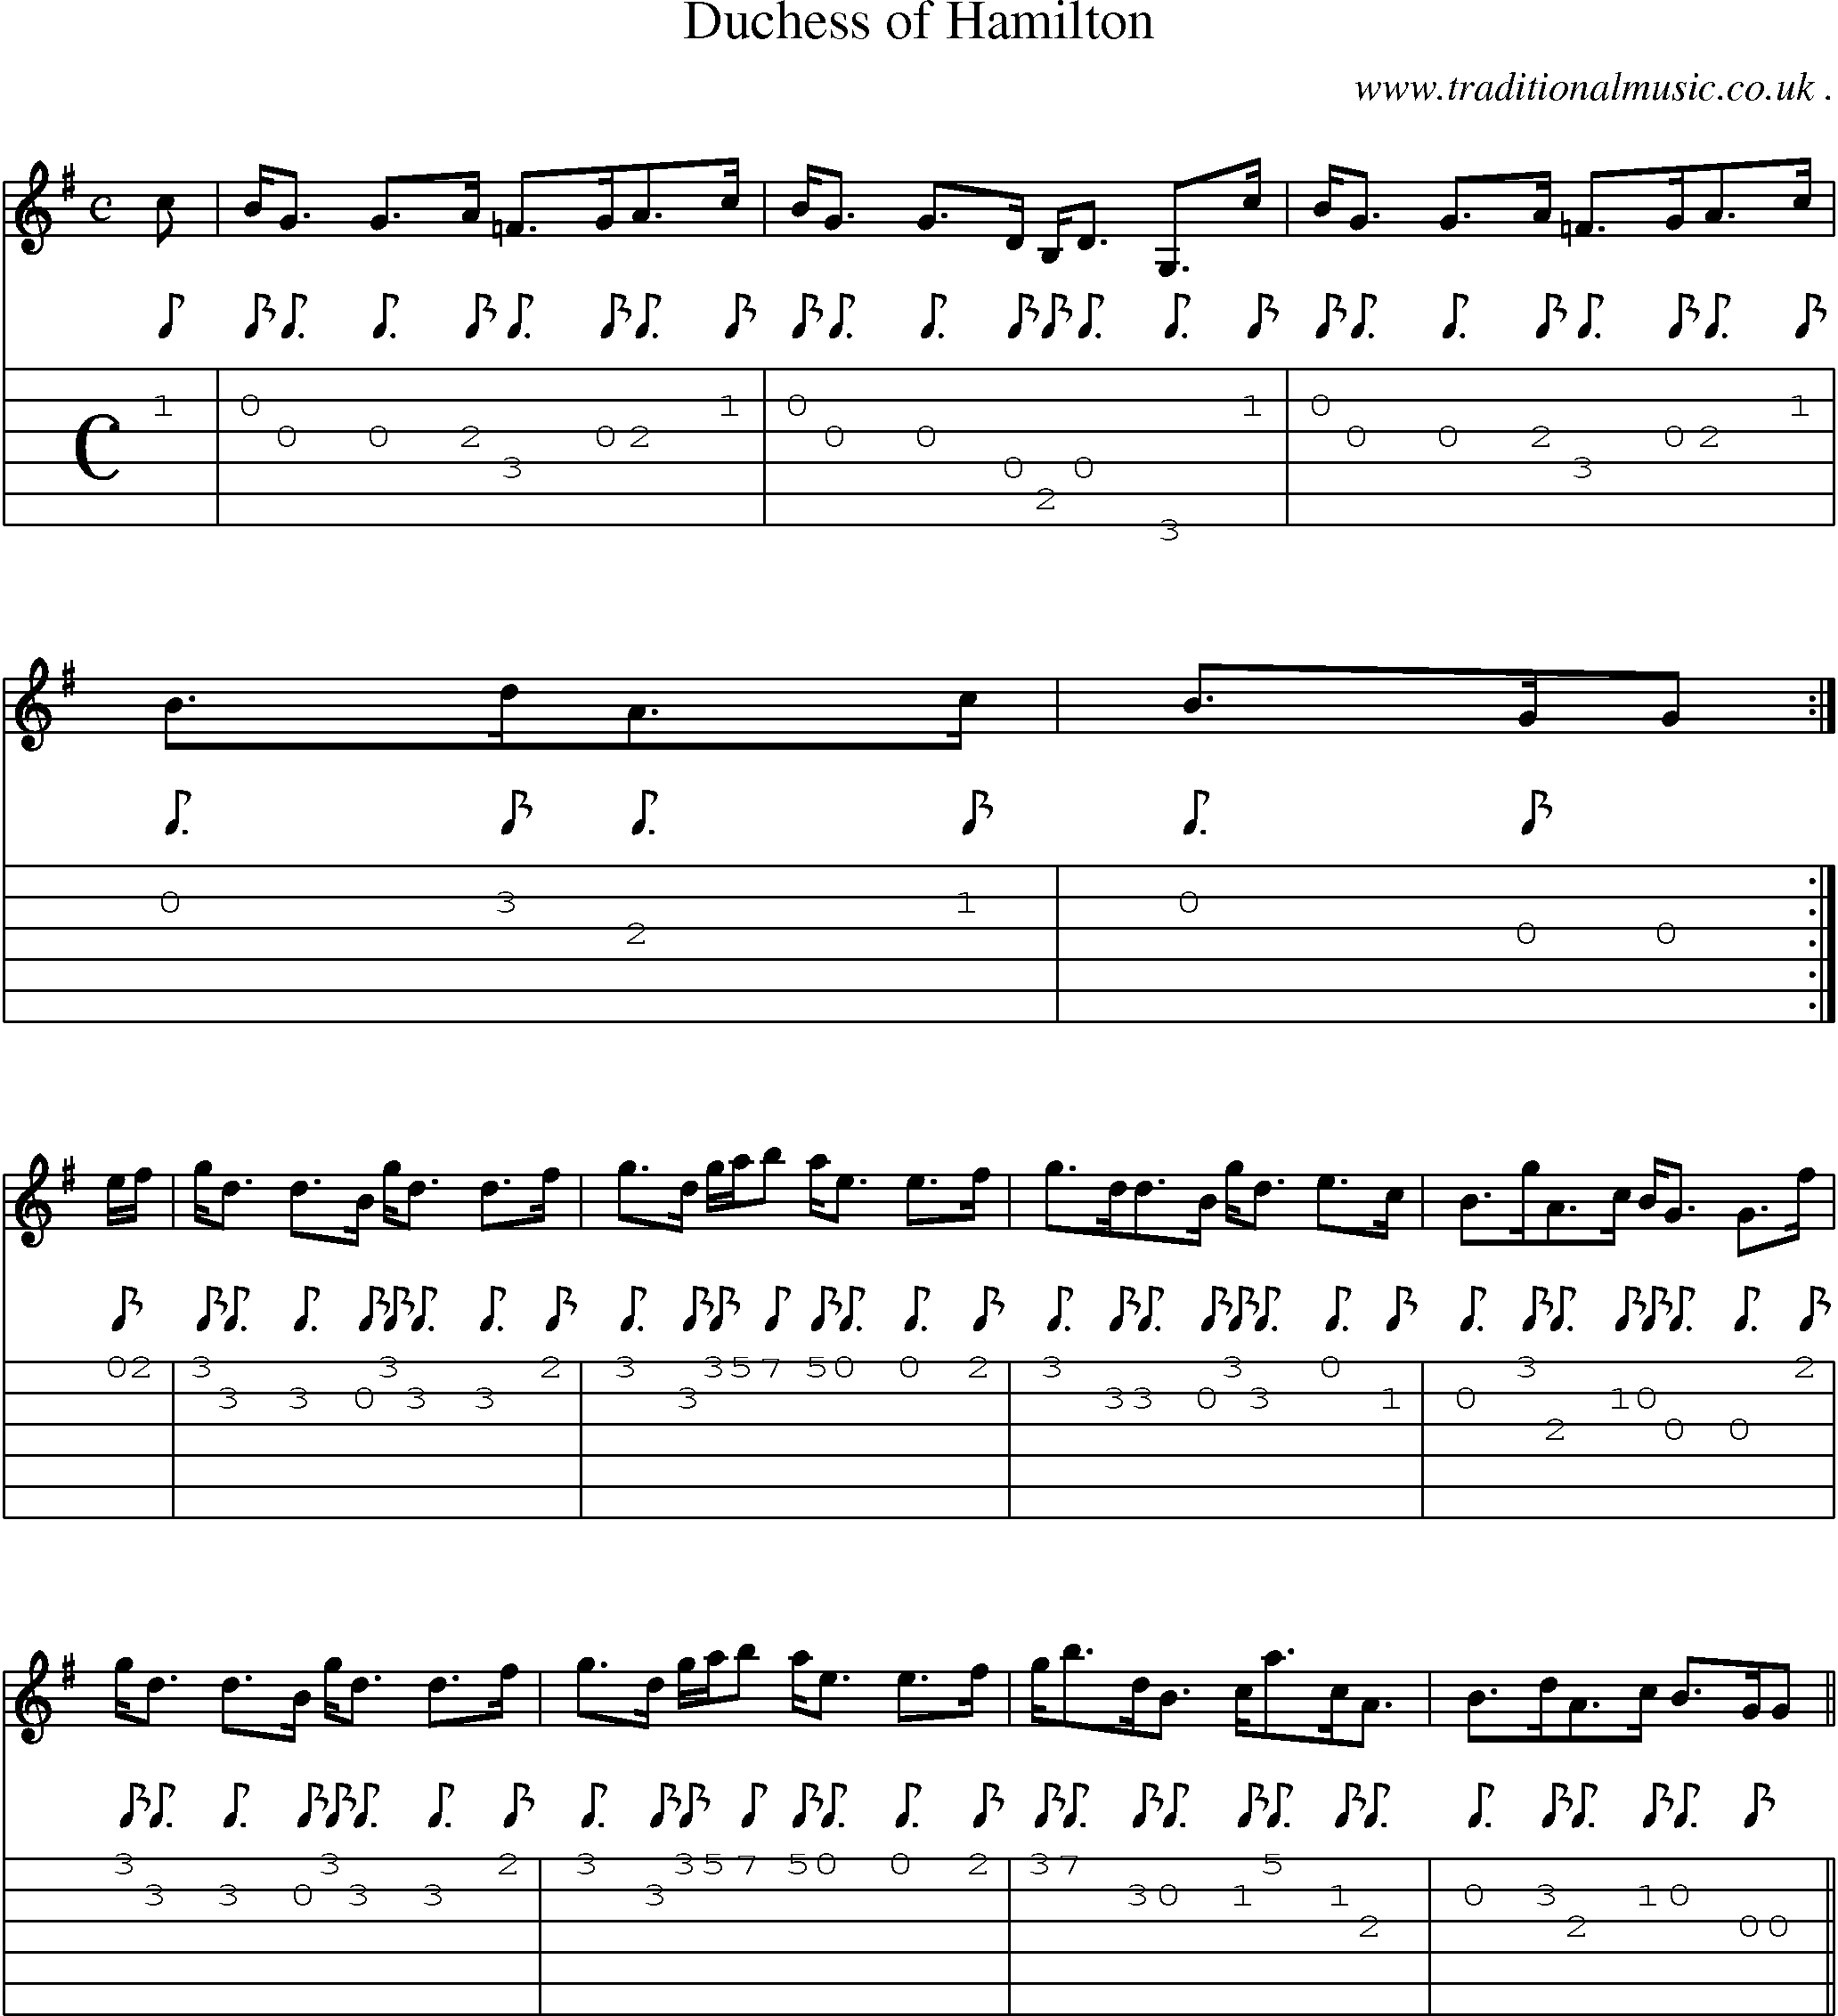 Sheet-music  score, Chords and Guitar Tabs for Duchess Of Hamilton